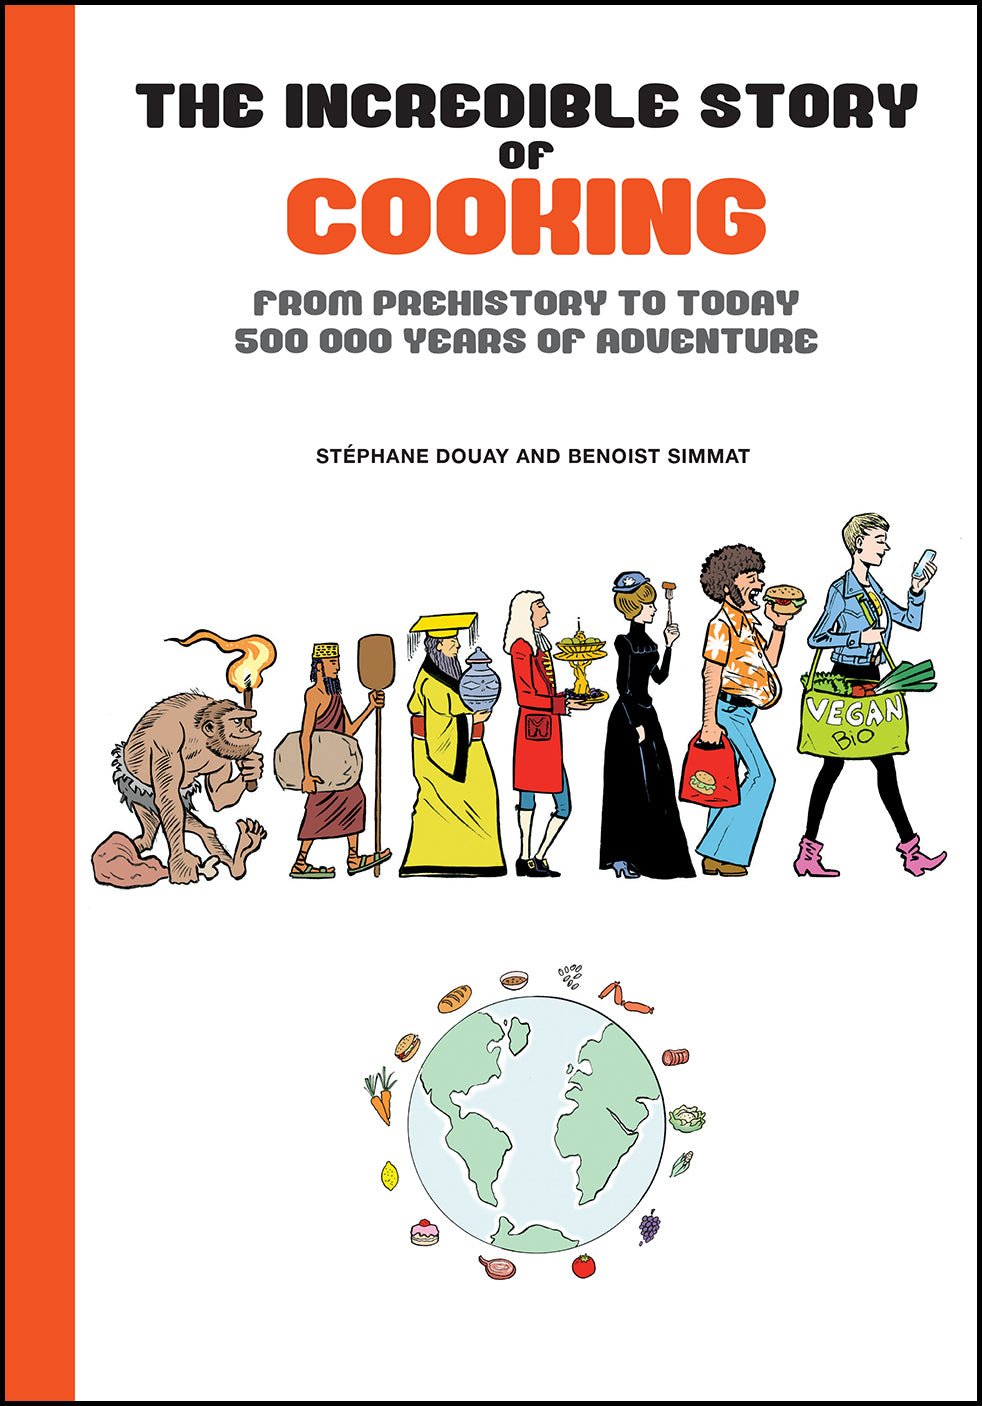 The Incredible Story of Cooking